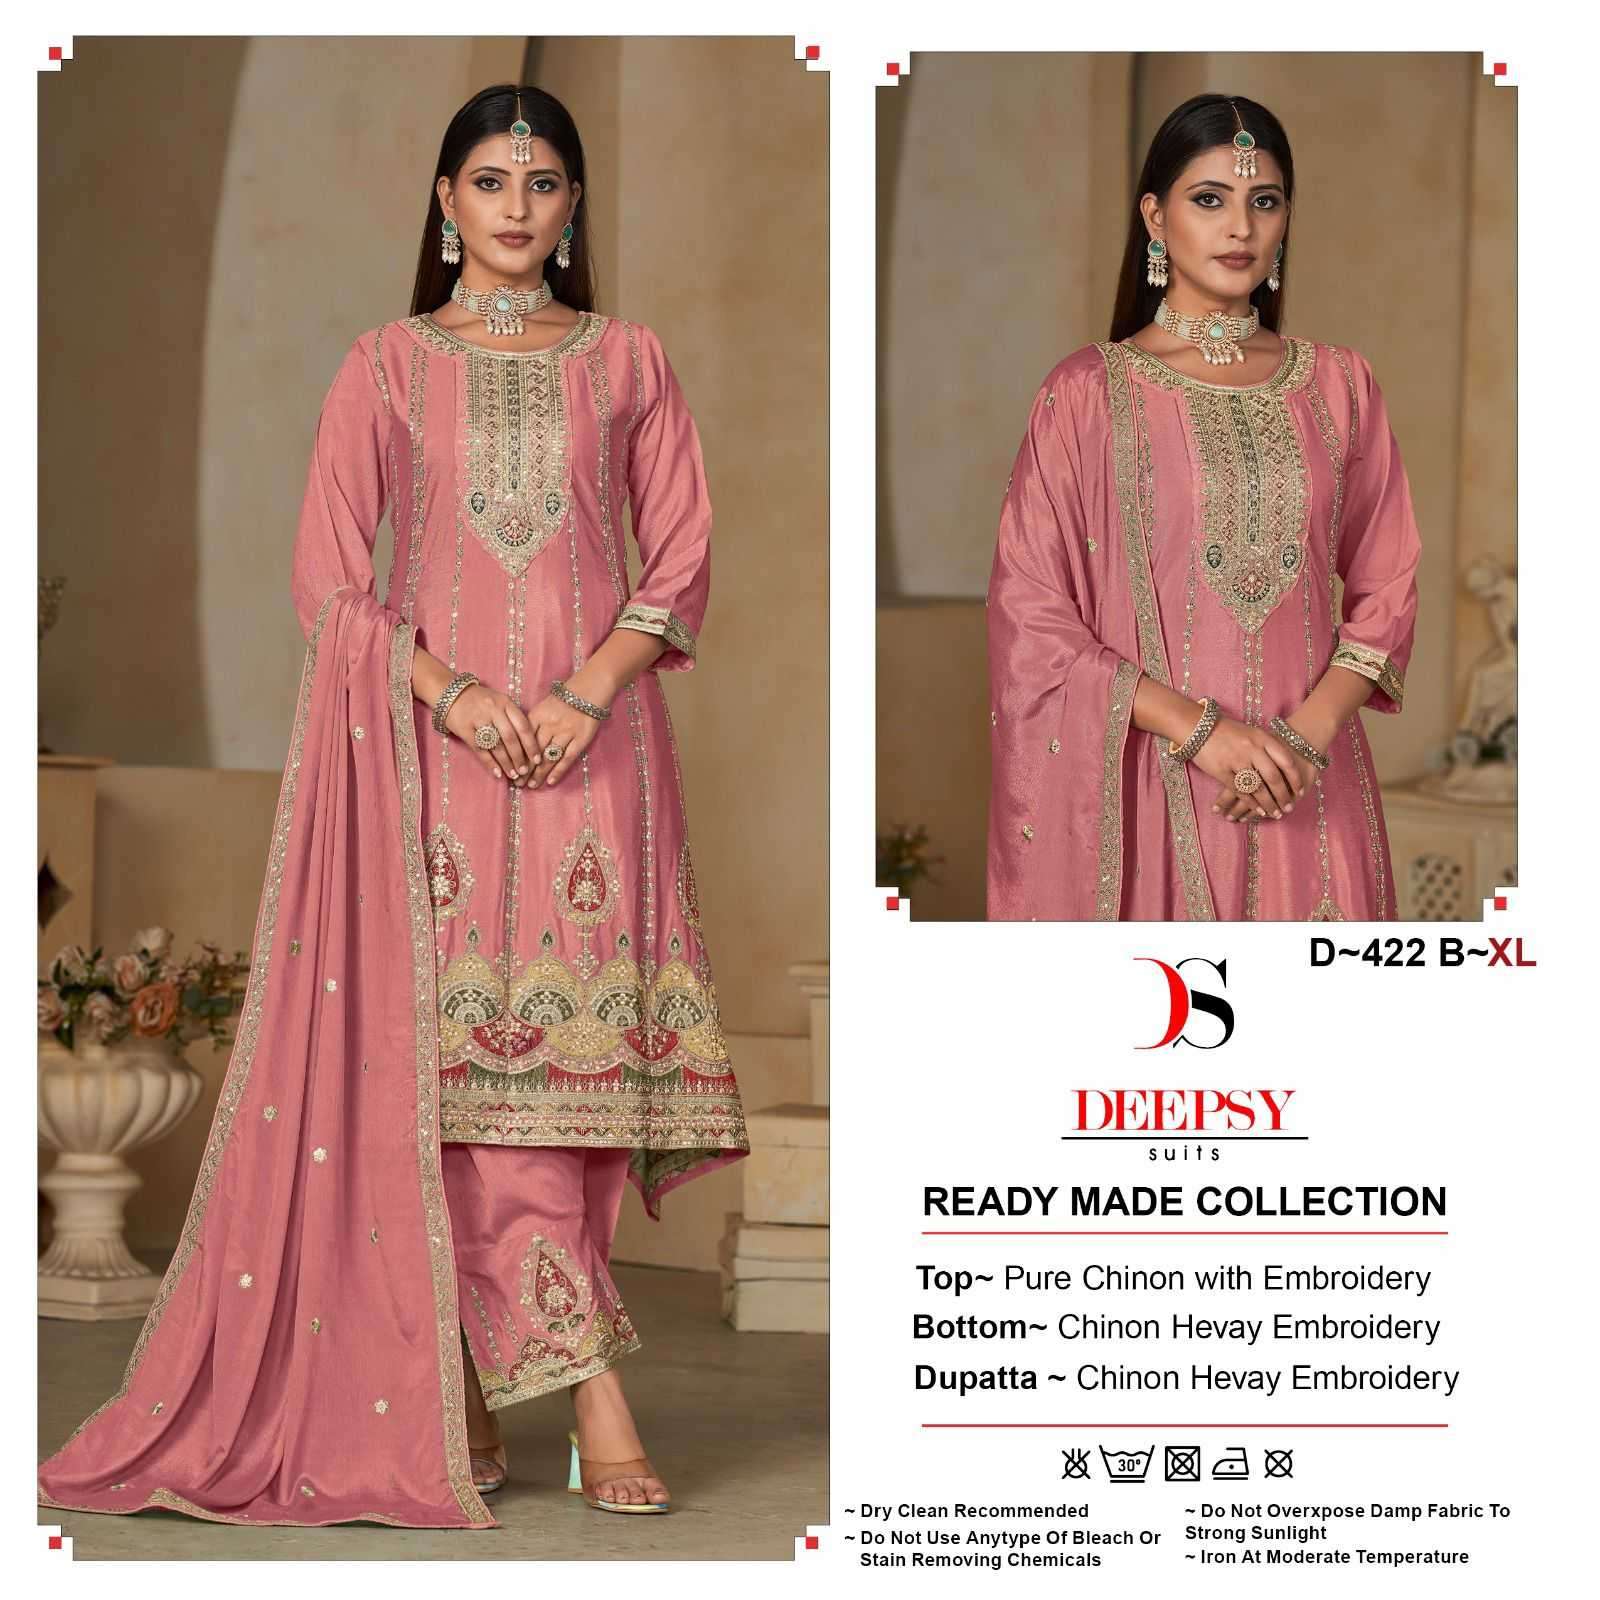 DEEPSY SERIES 422 DESIGNER WITH EMBROIDERY WORK READYMADE CHINON SUITS ARE AVAILABLE AT WHOLESALE PRICE